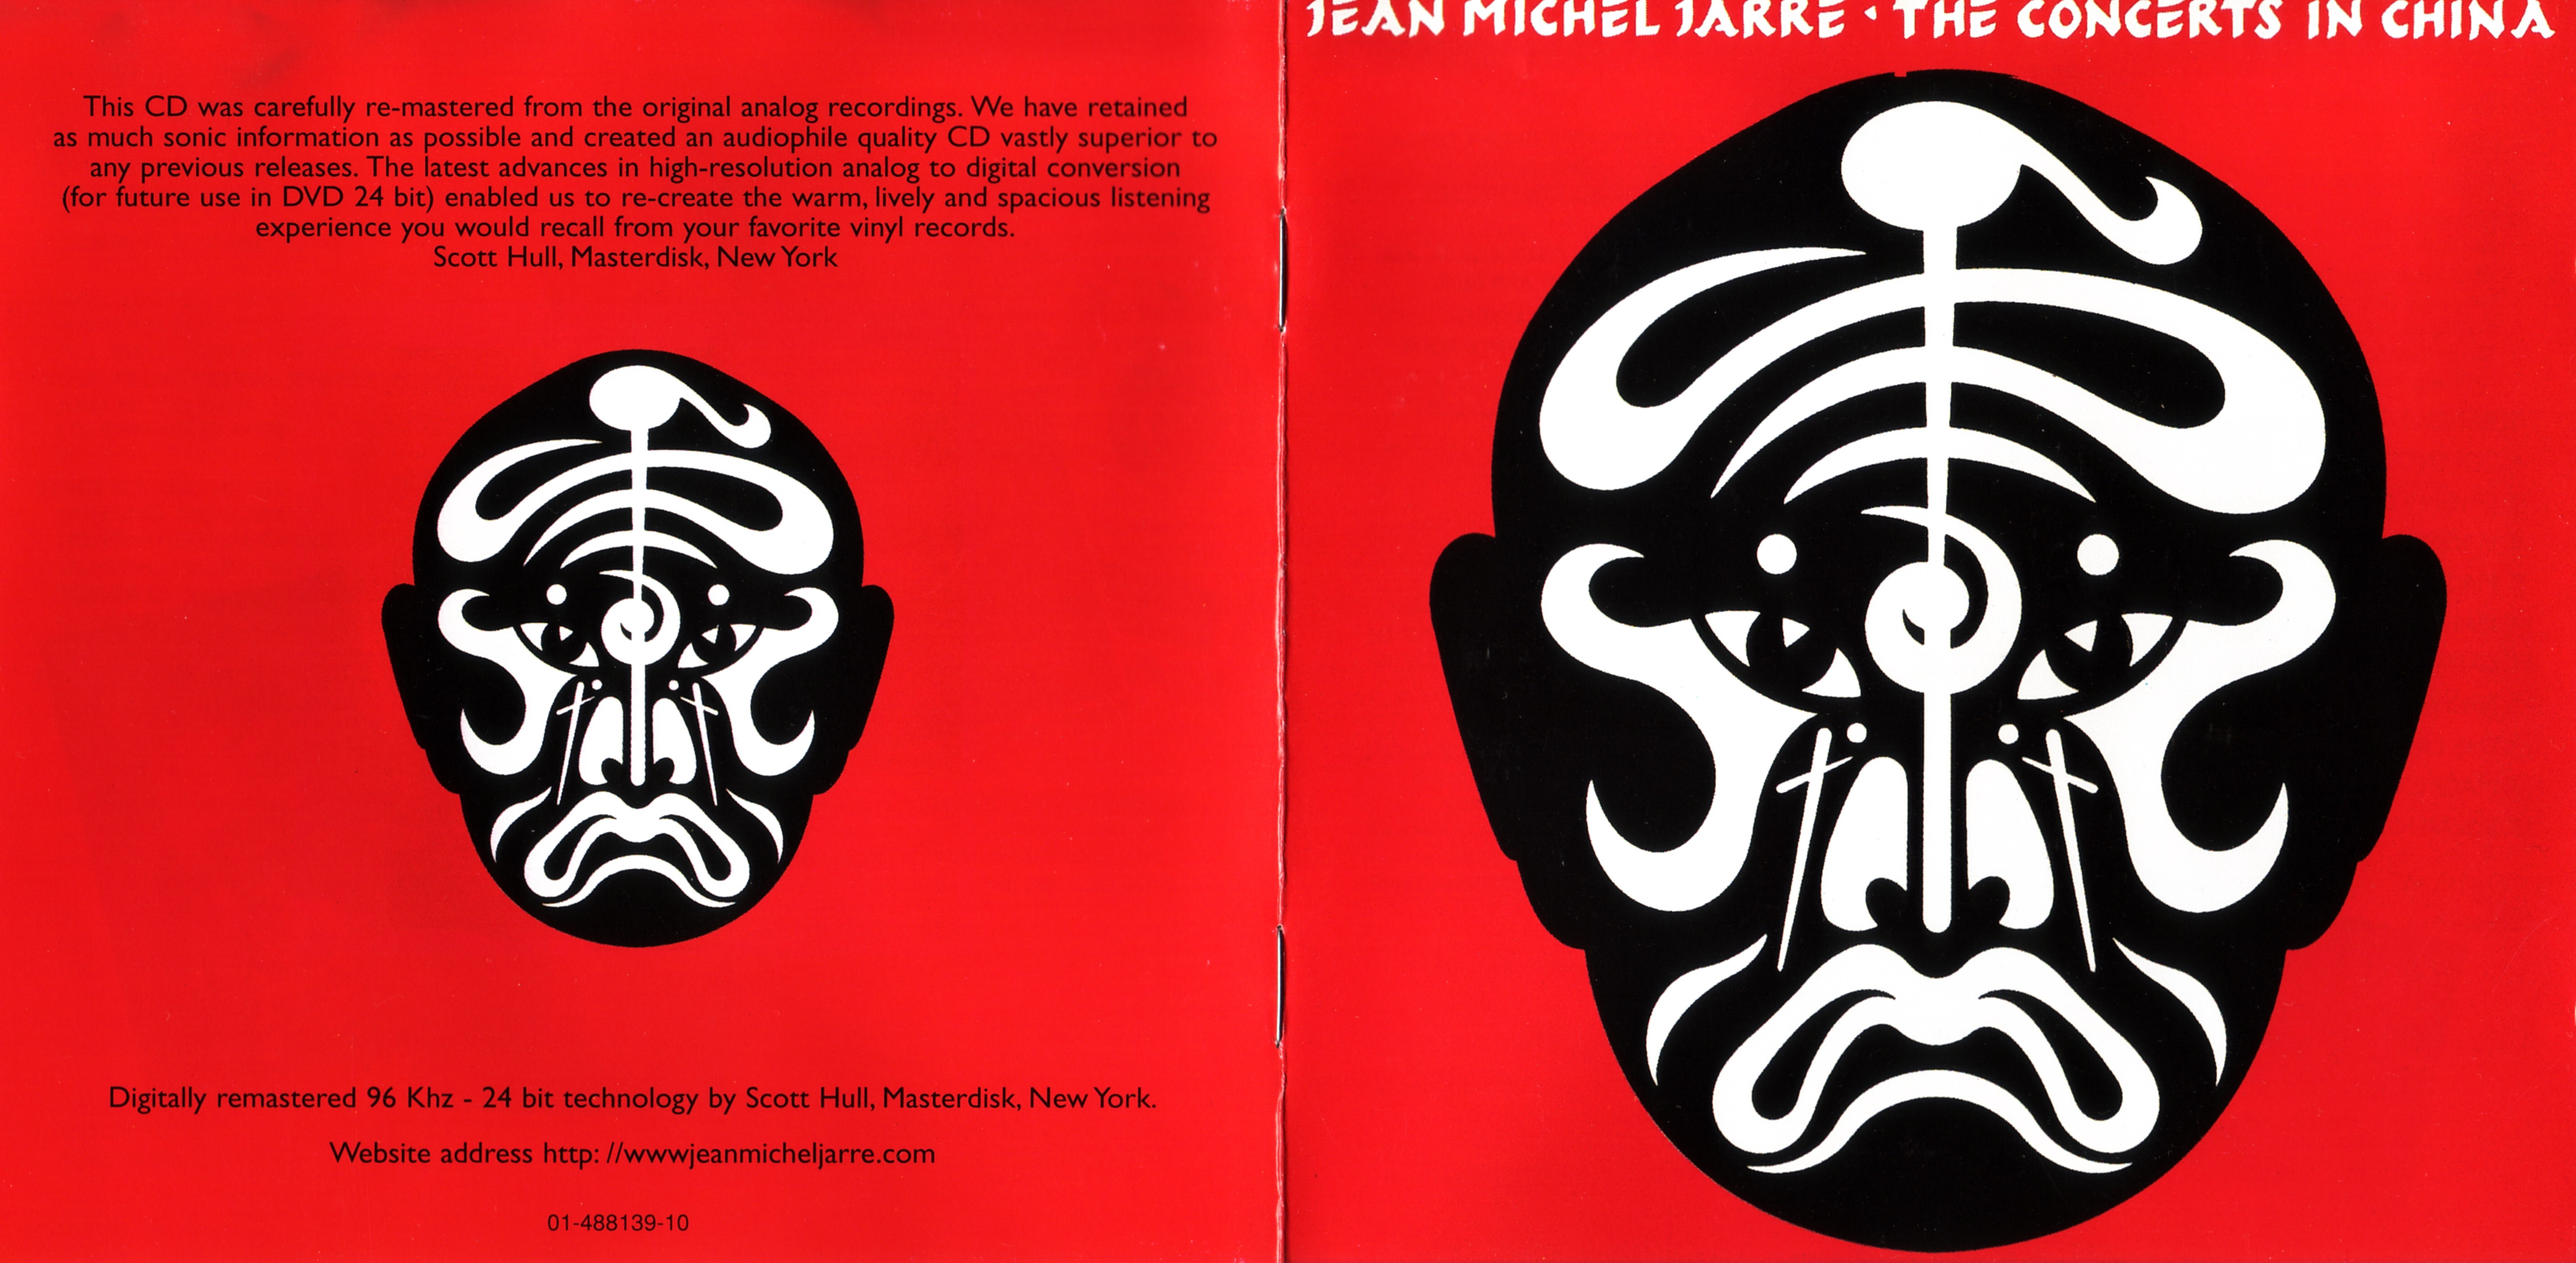 Artwork - Jean Michel Jarre - The Concerts In China - Booklet - Front.jpg